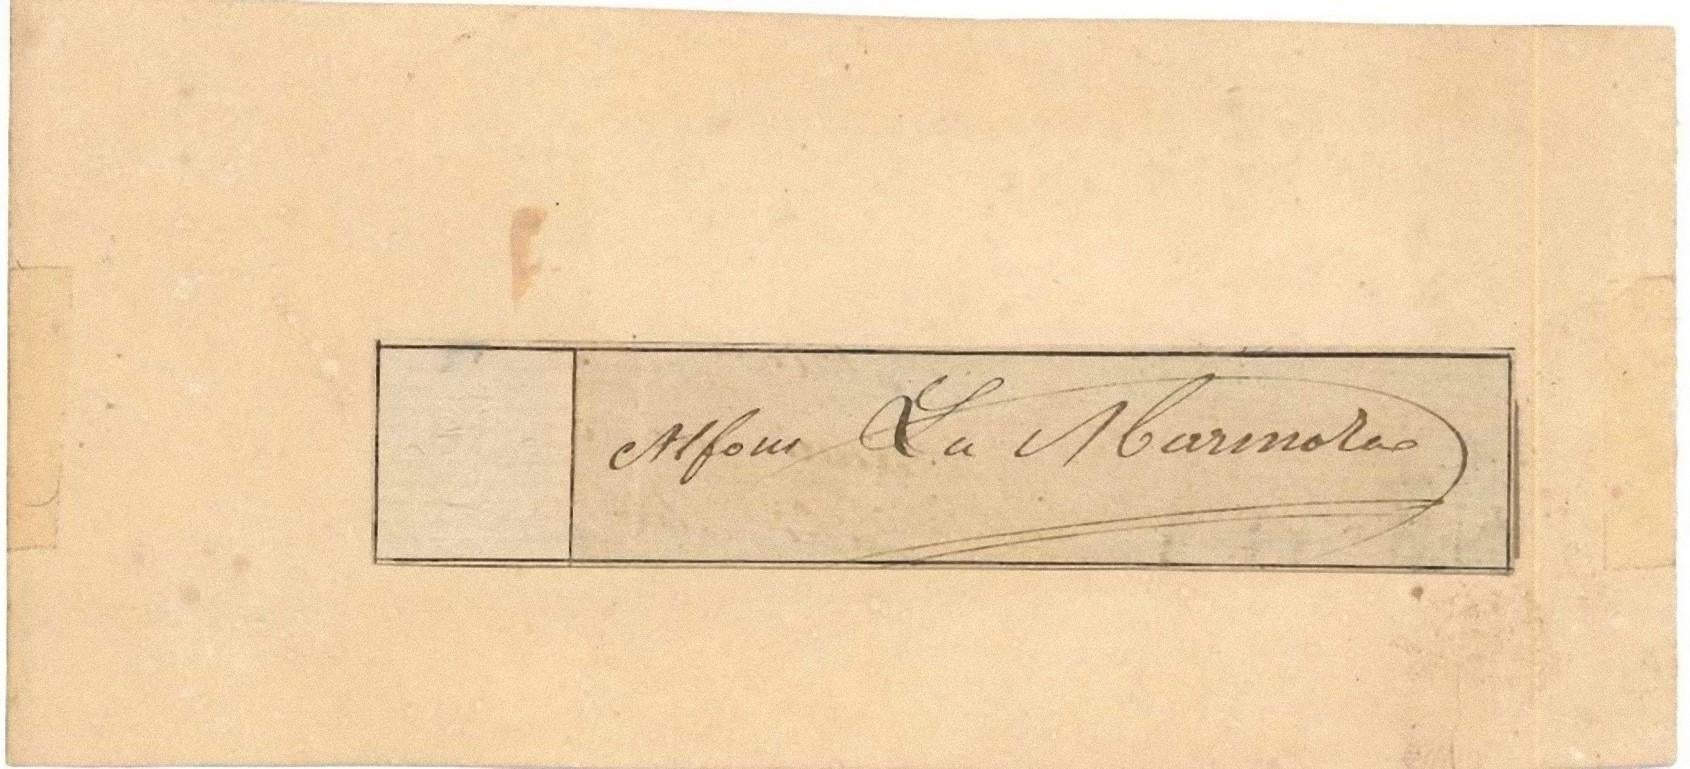 Card signed by Alfonso la Marmora. (20x9 cm). Perfect conditions.

Collaborator of the King of Sardinia, Carlo Alberto, fought in the First Independence War (1848-1849). Named several times as minister of war, between 1849 and 1857 radically